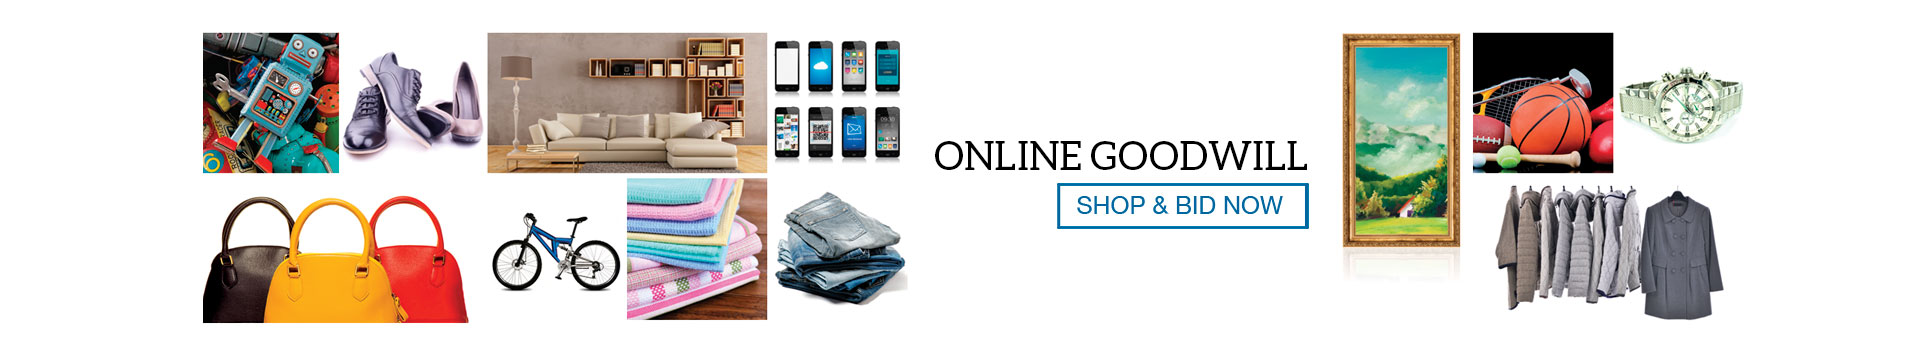 goodwill online stores